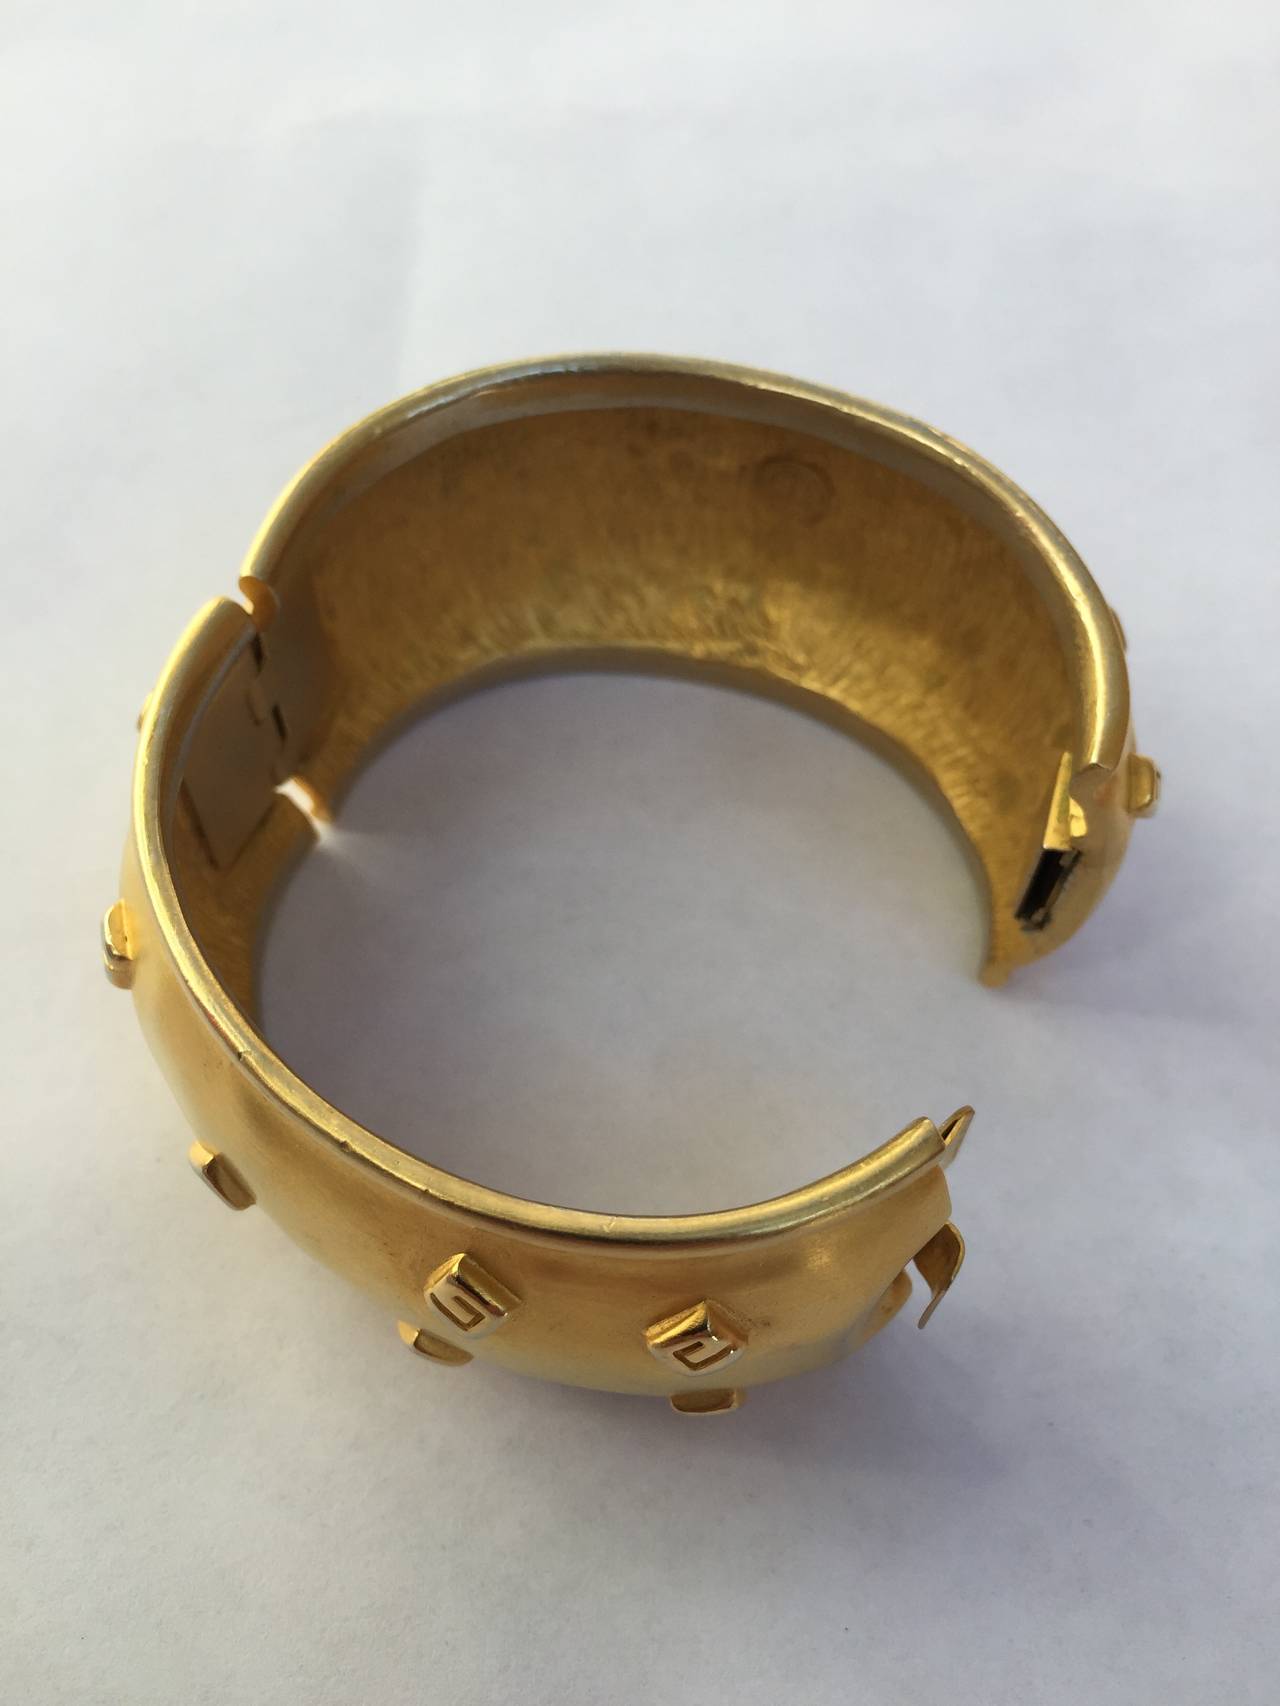 Aesthetic Movement Givenchy 1980s Logo Gold Cuff Bracelet. For Sale